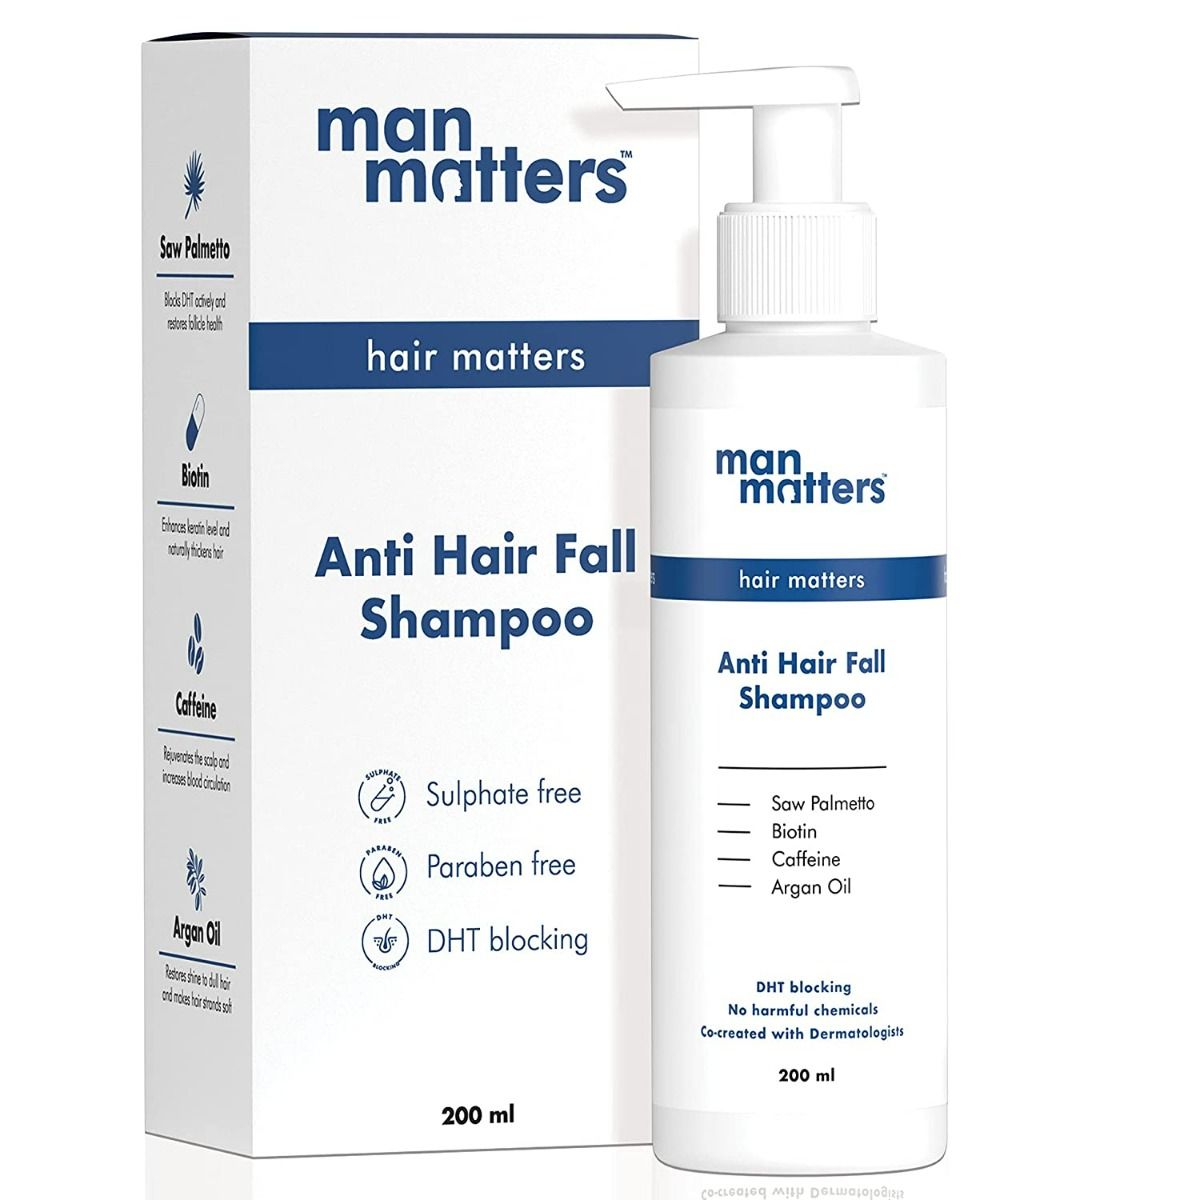 Man Matters Hair Growth Tonic, 60 ml Price, Uses, Side Effects, Composition  - Apollo Pharmacy